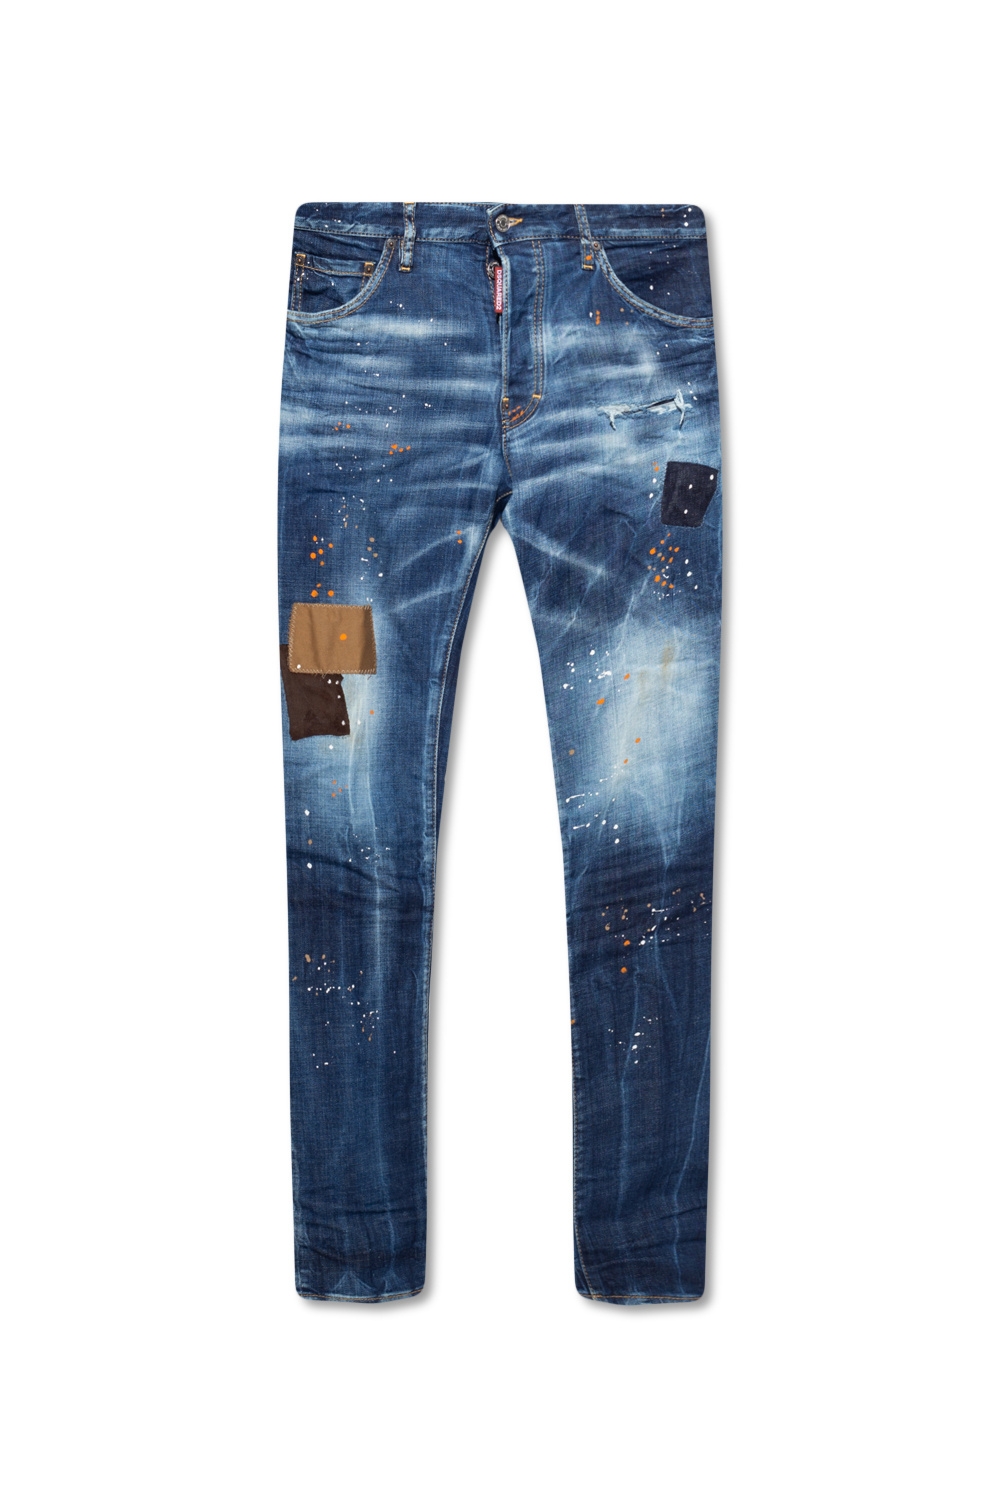 DSquared² Denim Black Knee Patches Wash Cool Guy Jeans in Blue for Men Mens Jeans DSquared² Jeans Save 27% 